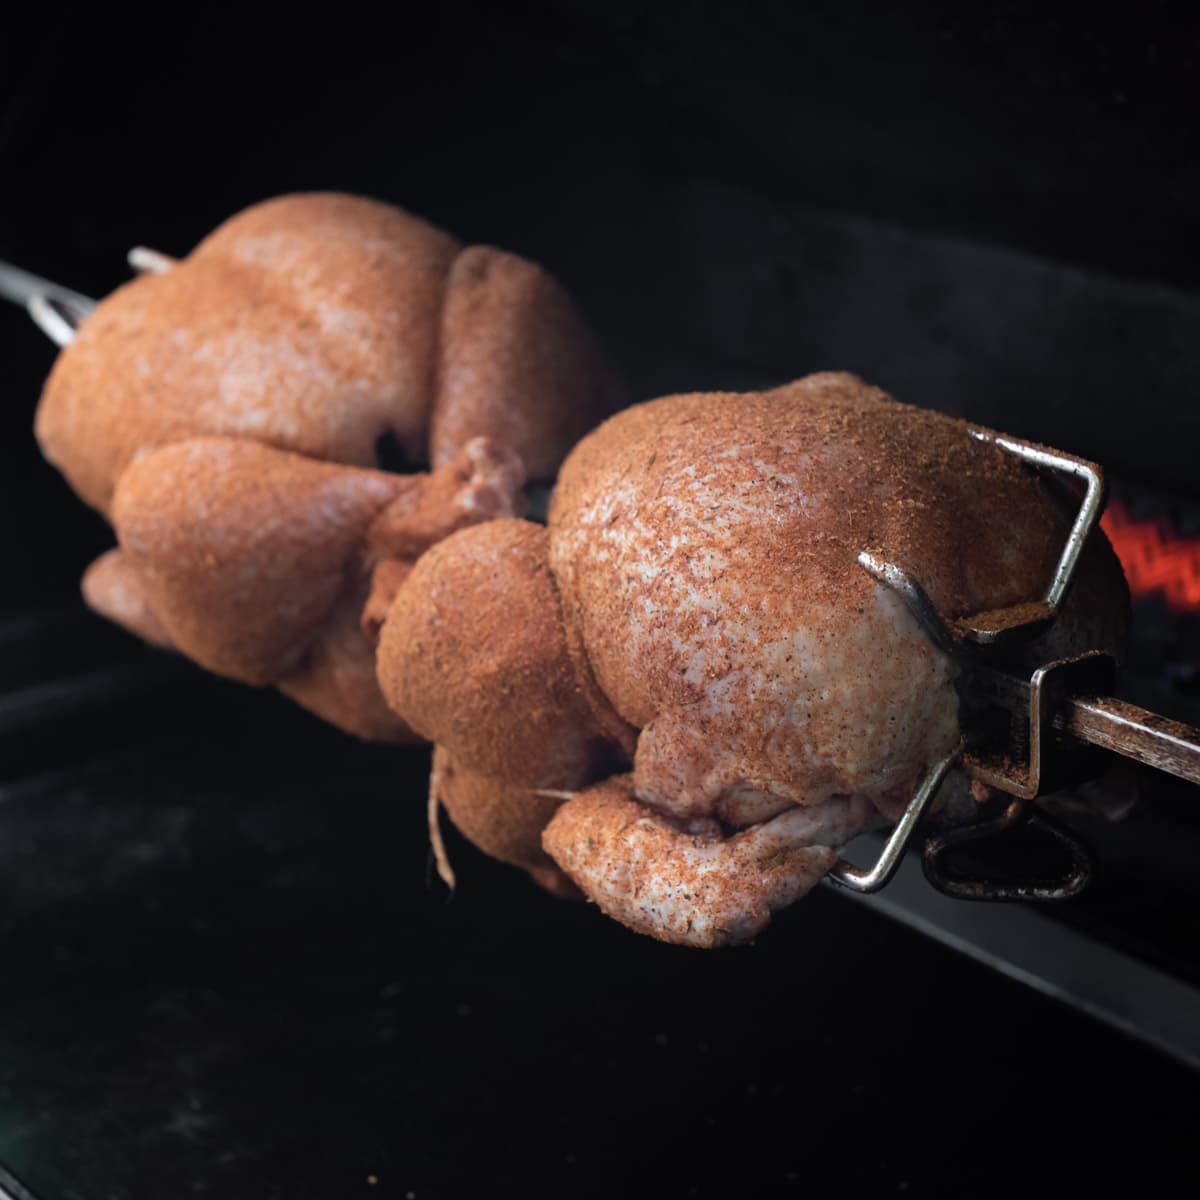 Raw seasoned chickens on a rotisserie spit with the flame in the background.